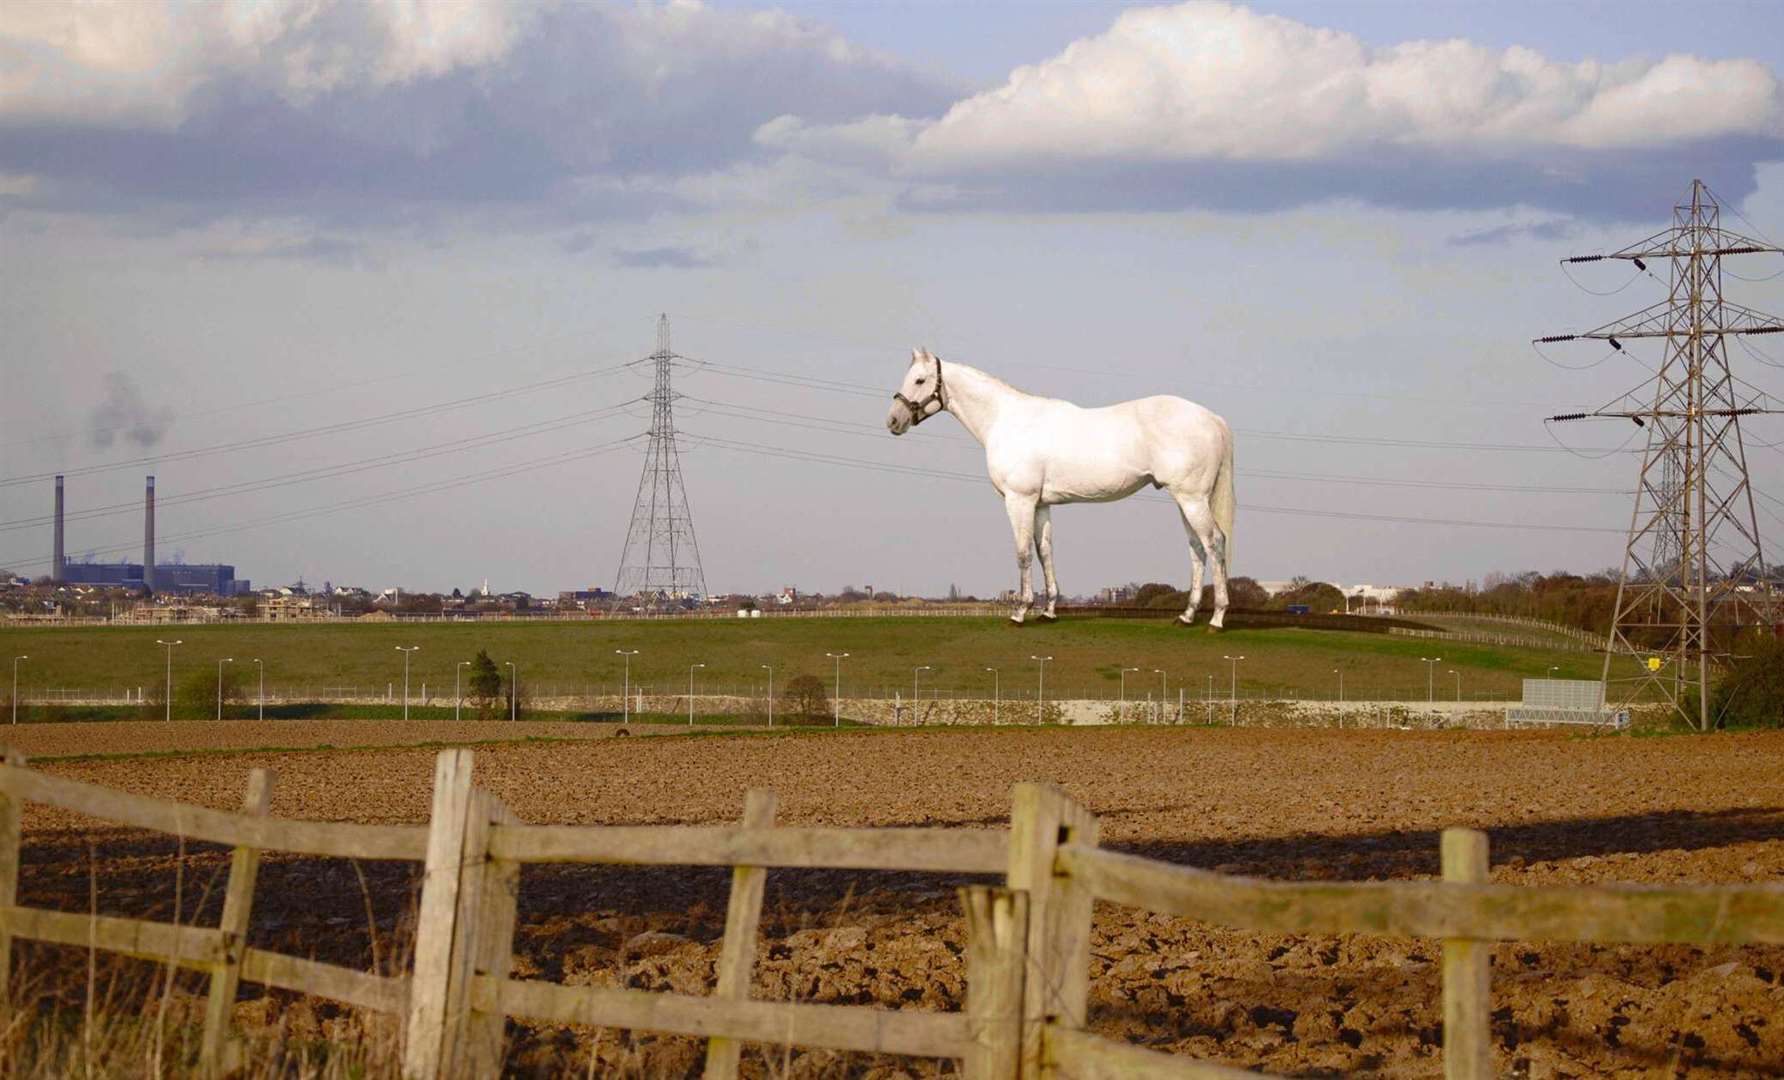 The white horse was designed by the artist Mark Wallinger